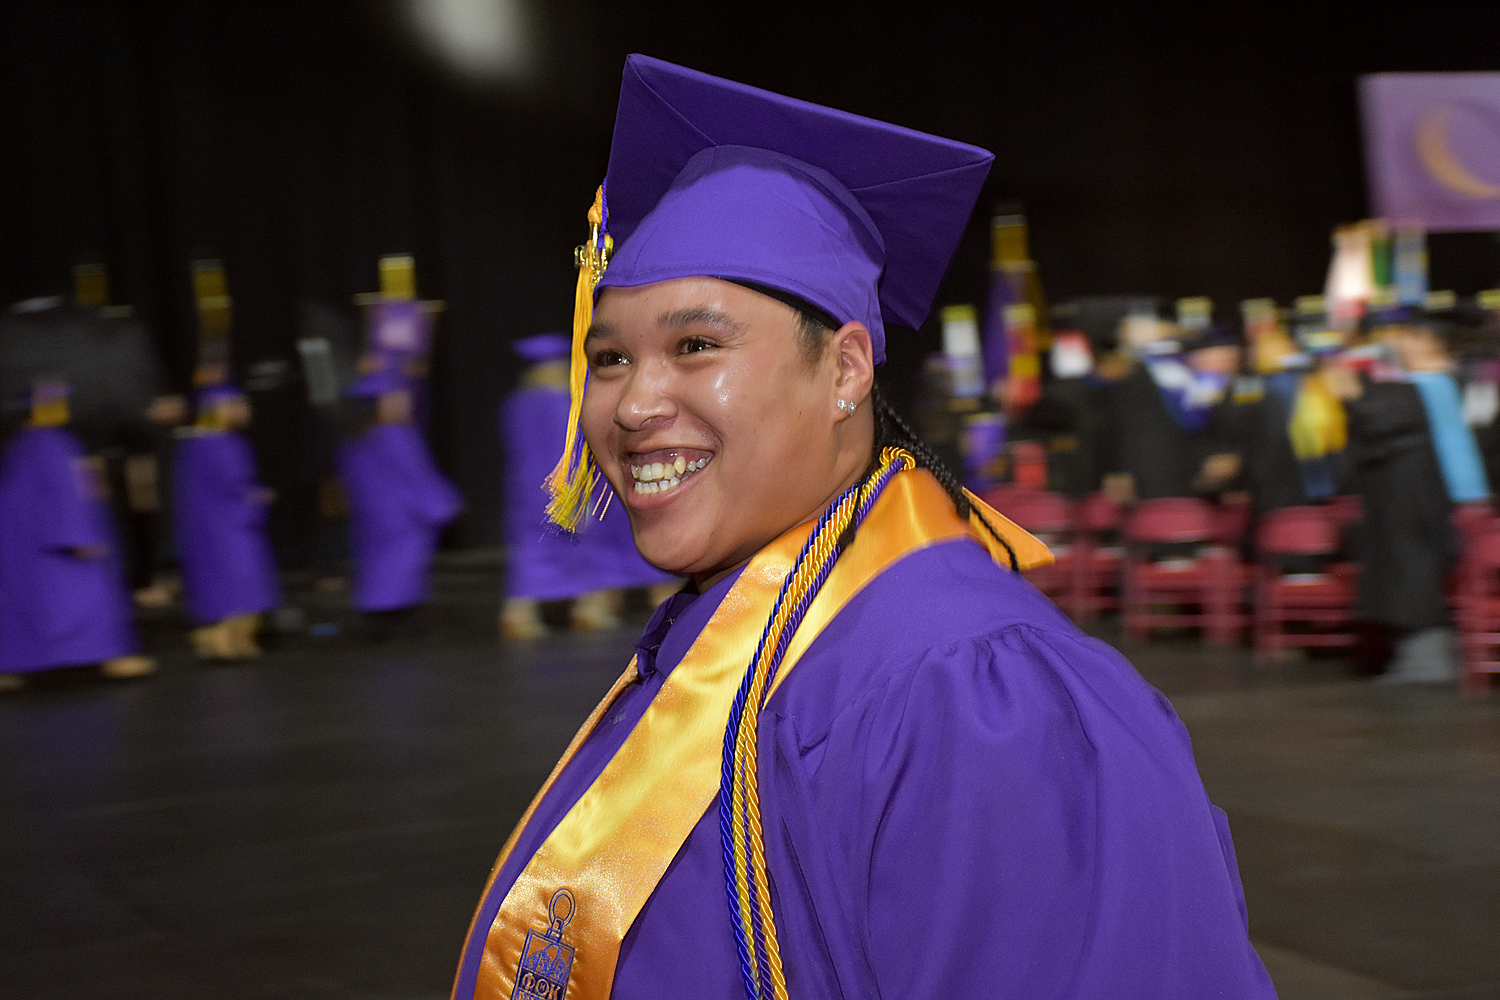 person wearing purple cap and gown and yellow sash indicating honor society